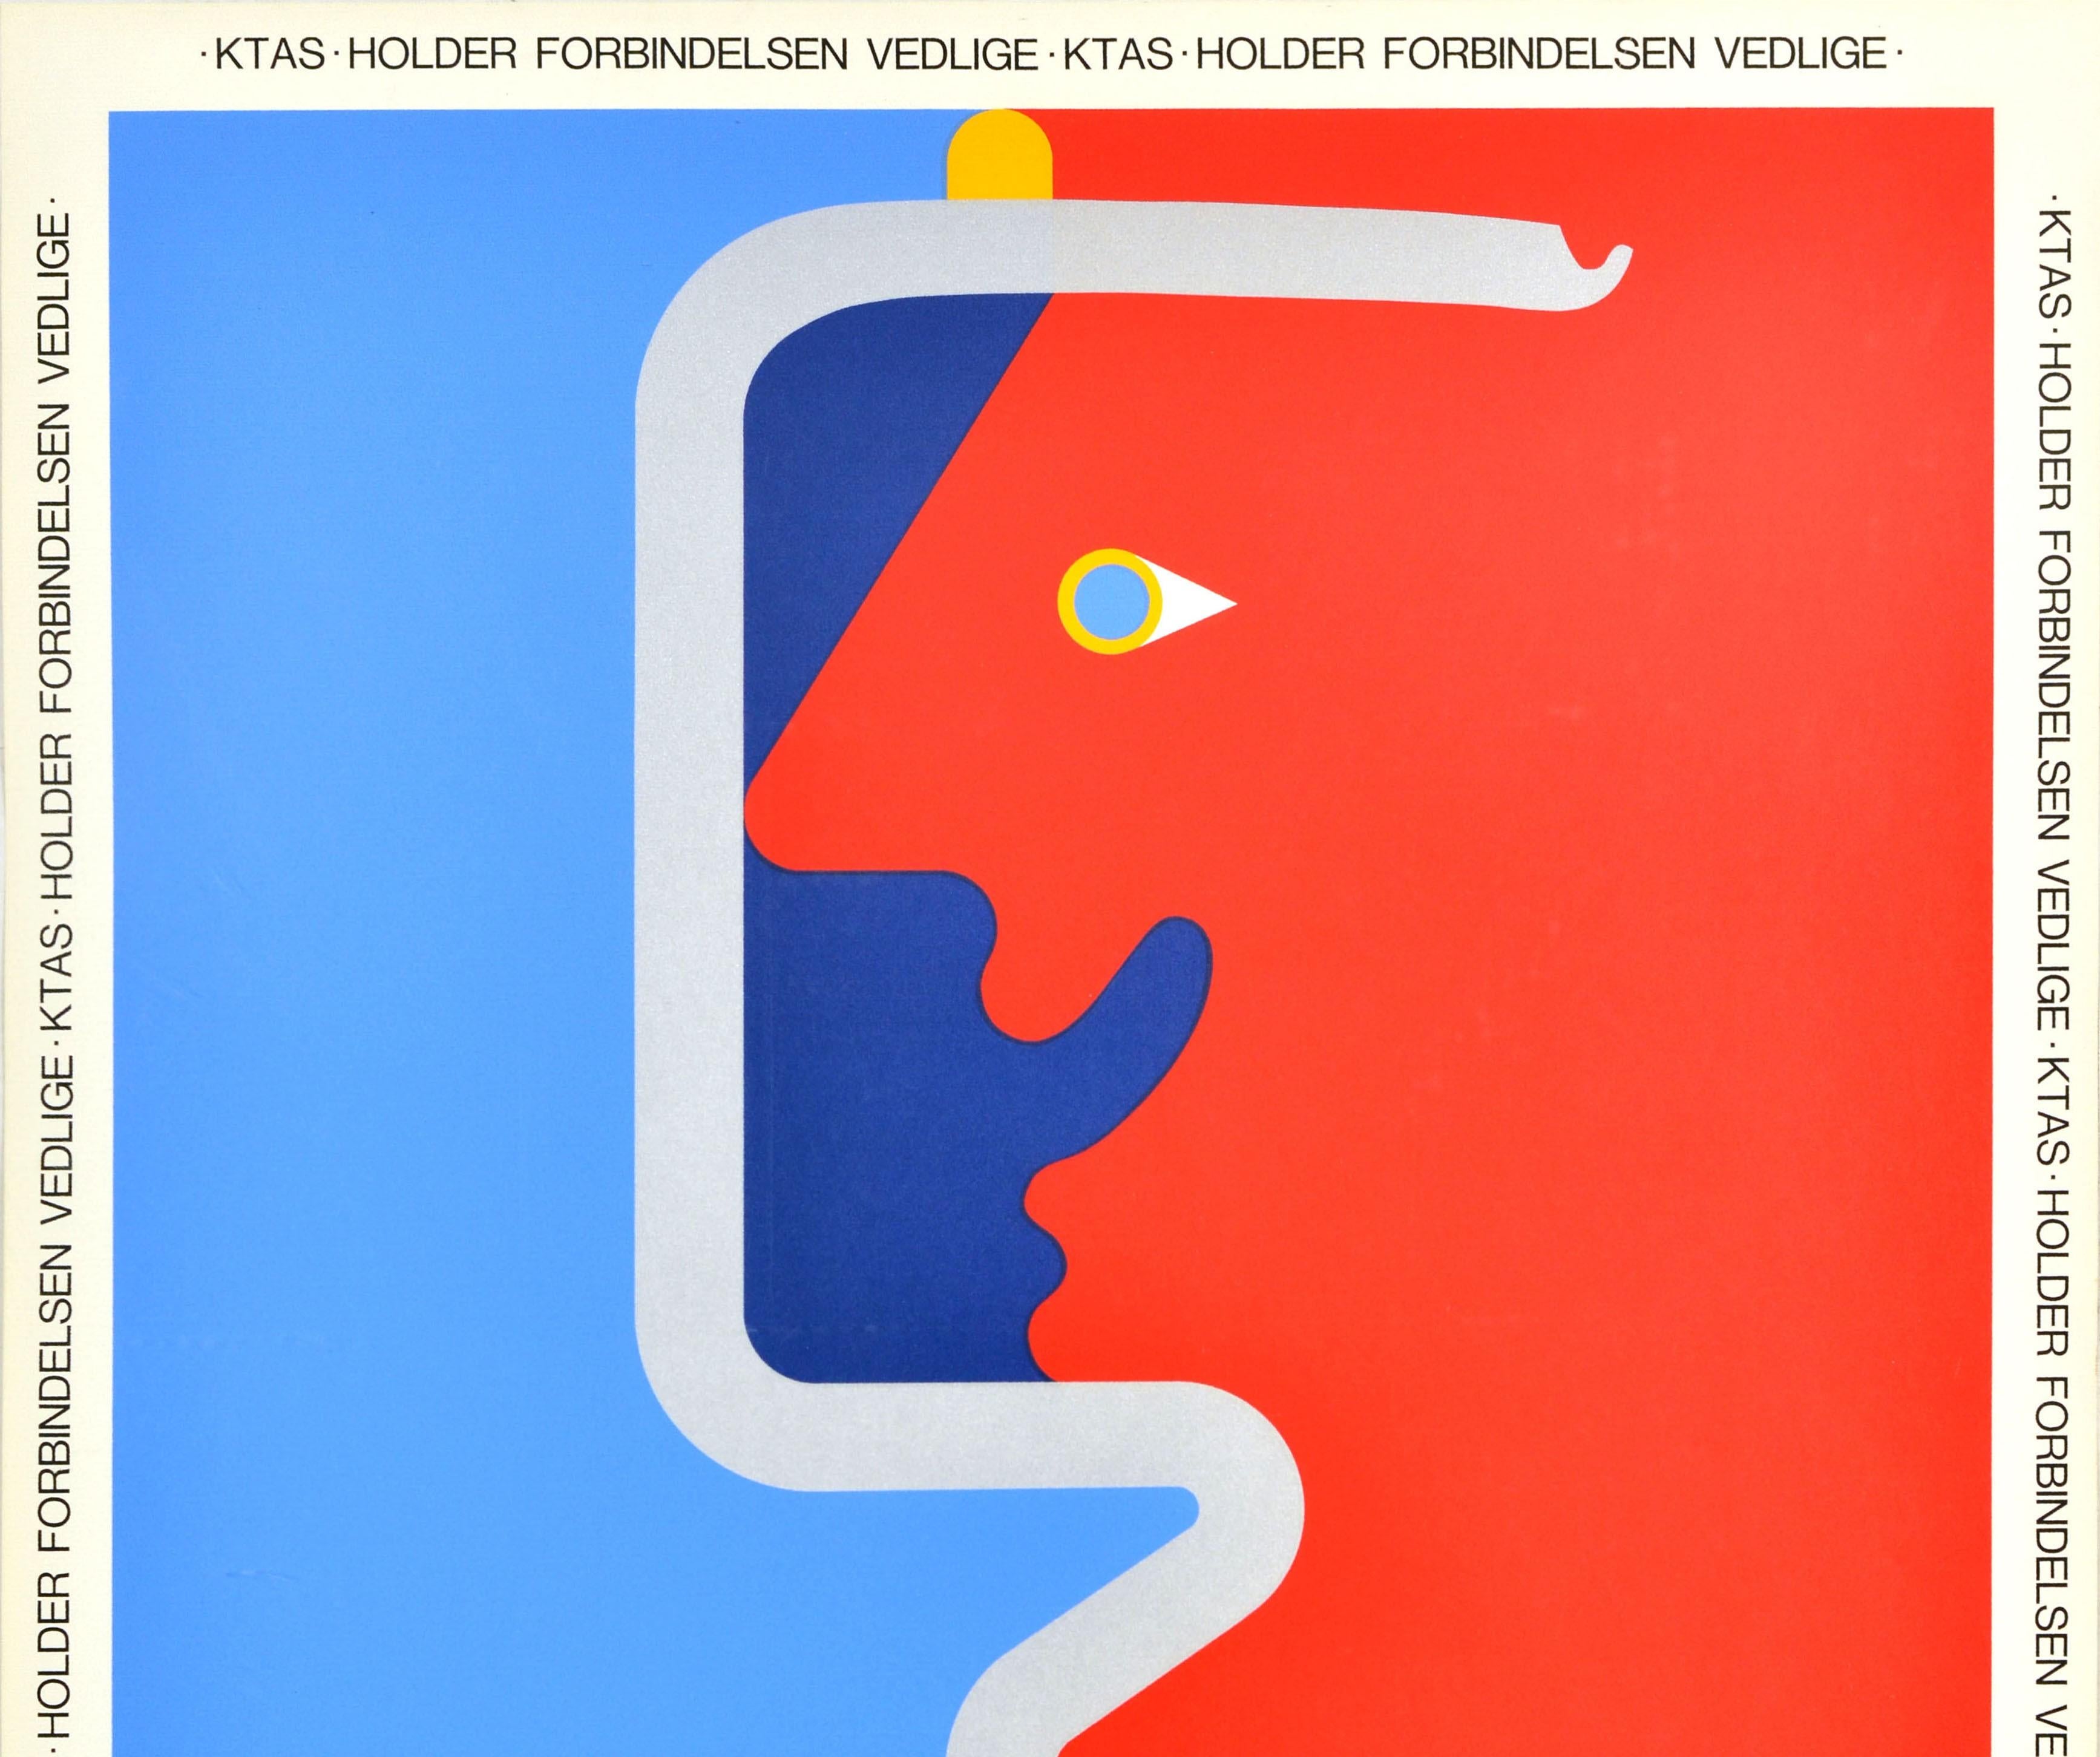 Original vintage advertising poster - Ktas Holder Forbindelsen Vedlige / Maintains the connection - featuring a colourful illustration by the Danish poster artist and designer Per Arnoldi (b. 1941) of a stylised red silhouette of a person set on a